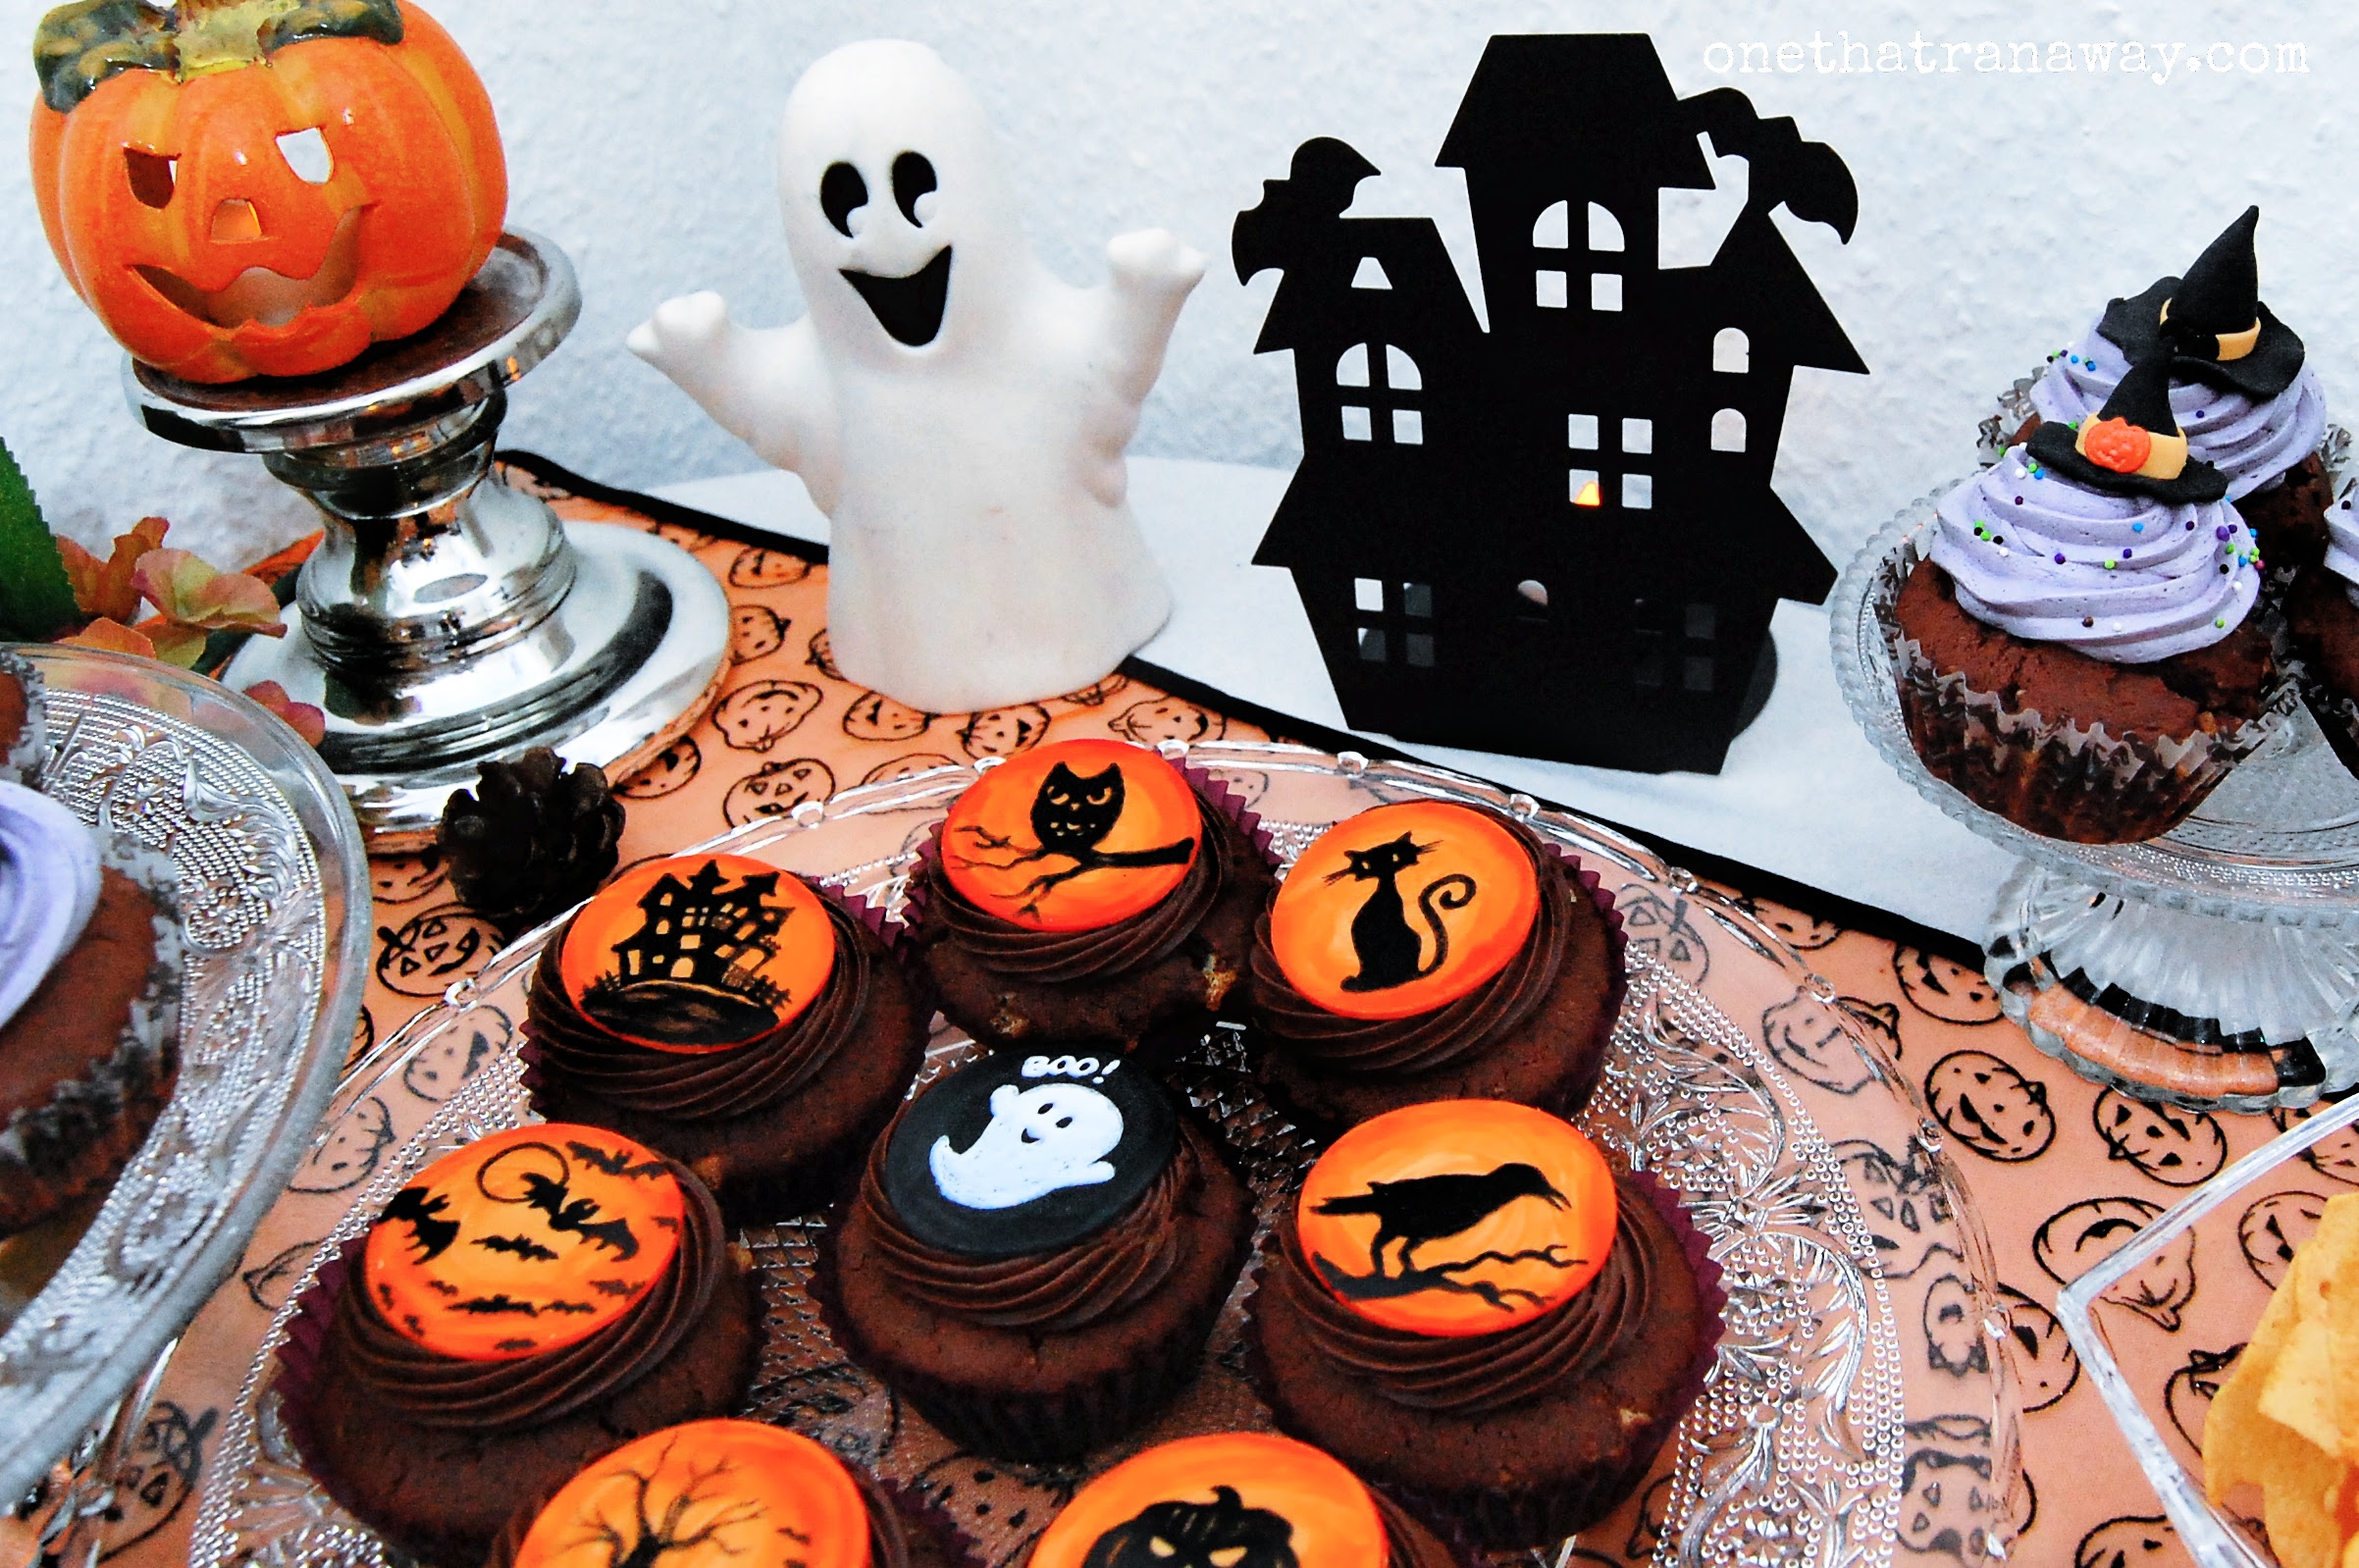 chocolate cupcakes with orange fondant toppers showing Halloween themed silhouettes on a table with Halloween decorations